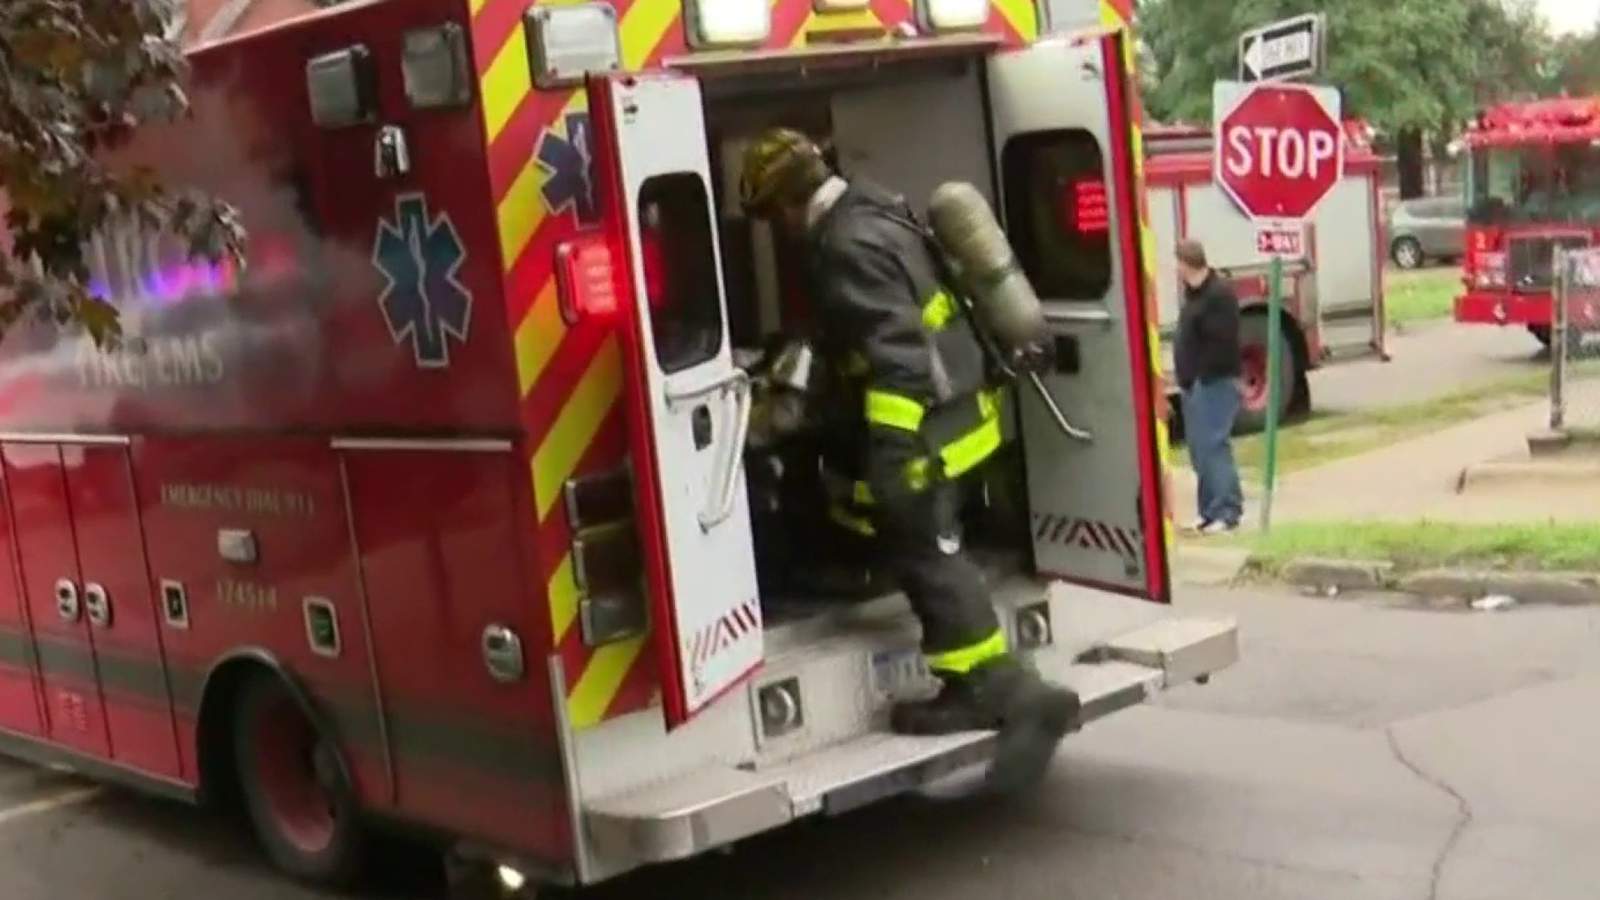 Detroit firefighters honored for saving one of their own during dangerous house fire